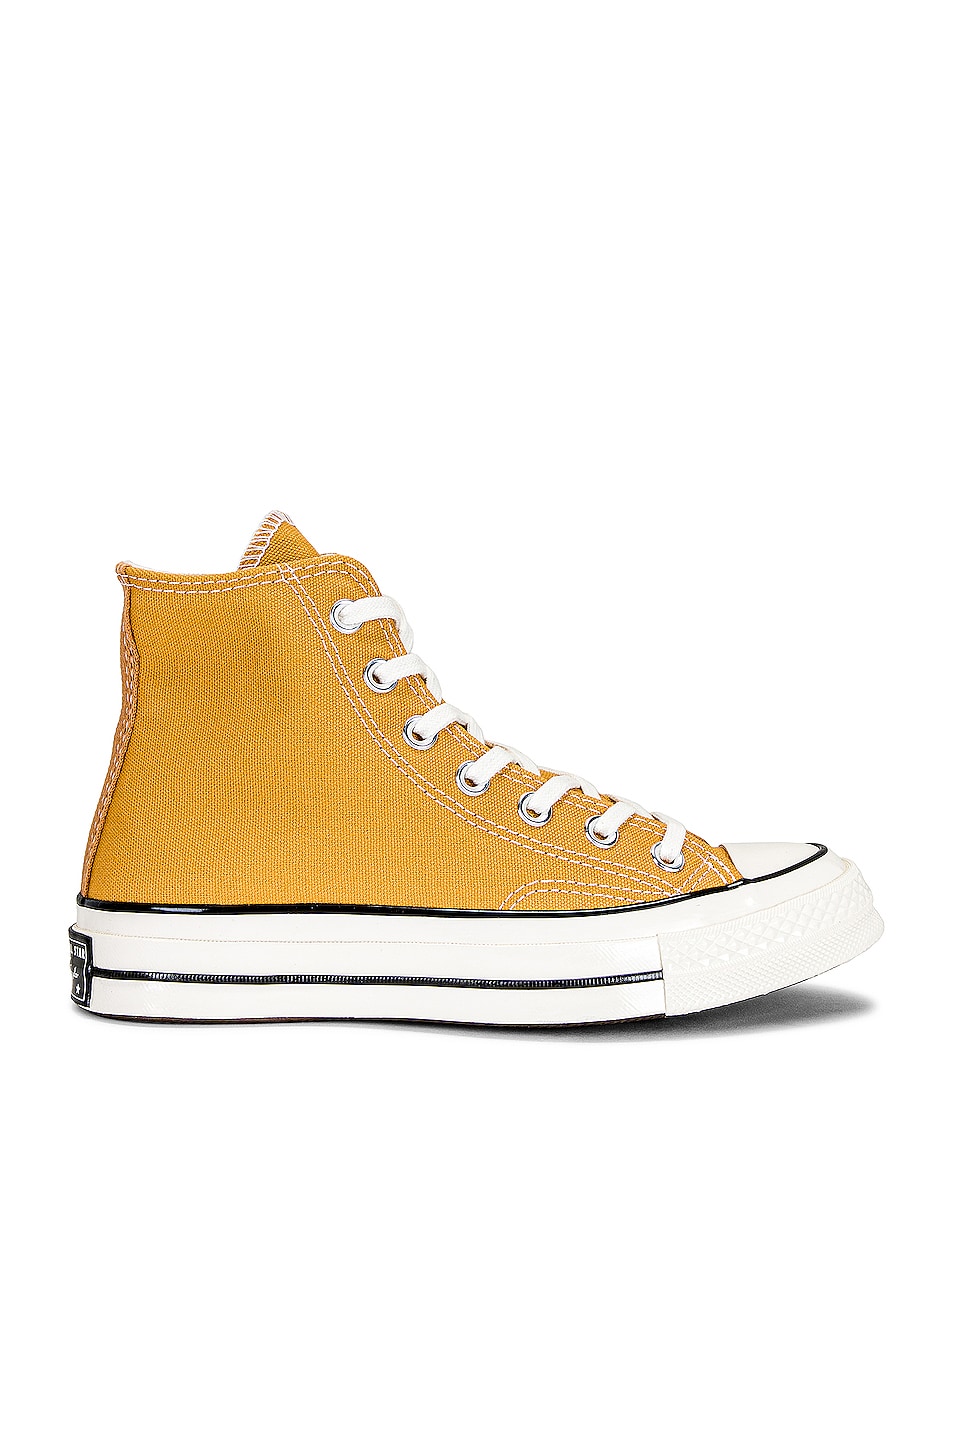 Image 1 of Converse Chuck 70 Canvas High Tops in Sunflower, Black, & Egret